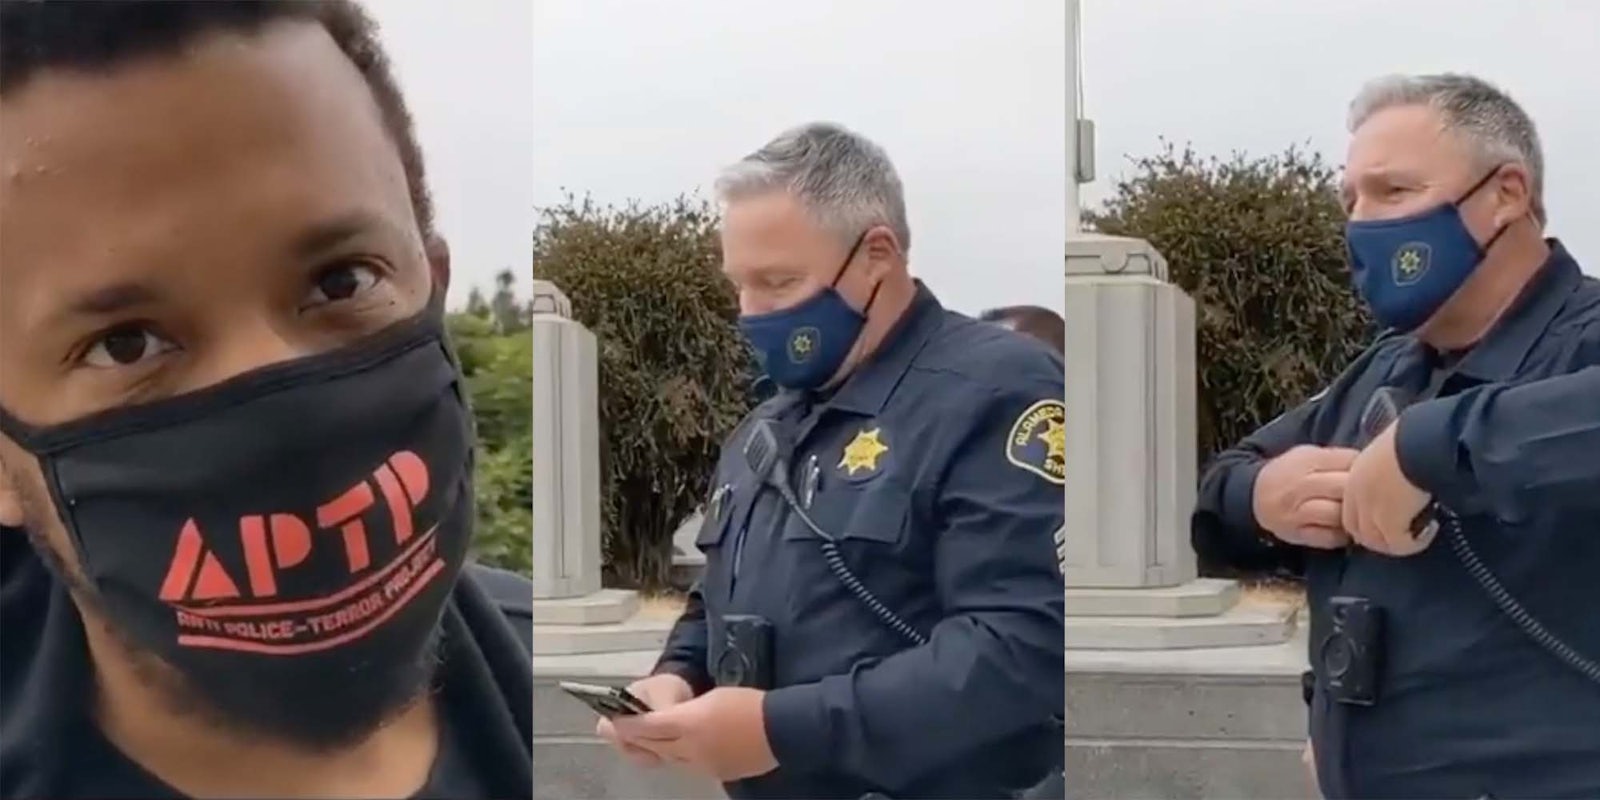 A police officer plays Taylor Swift on his phone while he is being recorded so the video will violate Youtube's copyright policy.